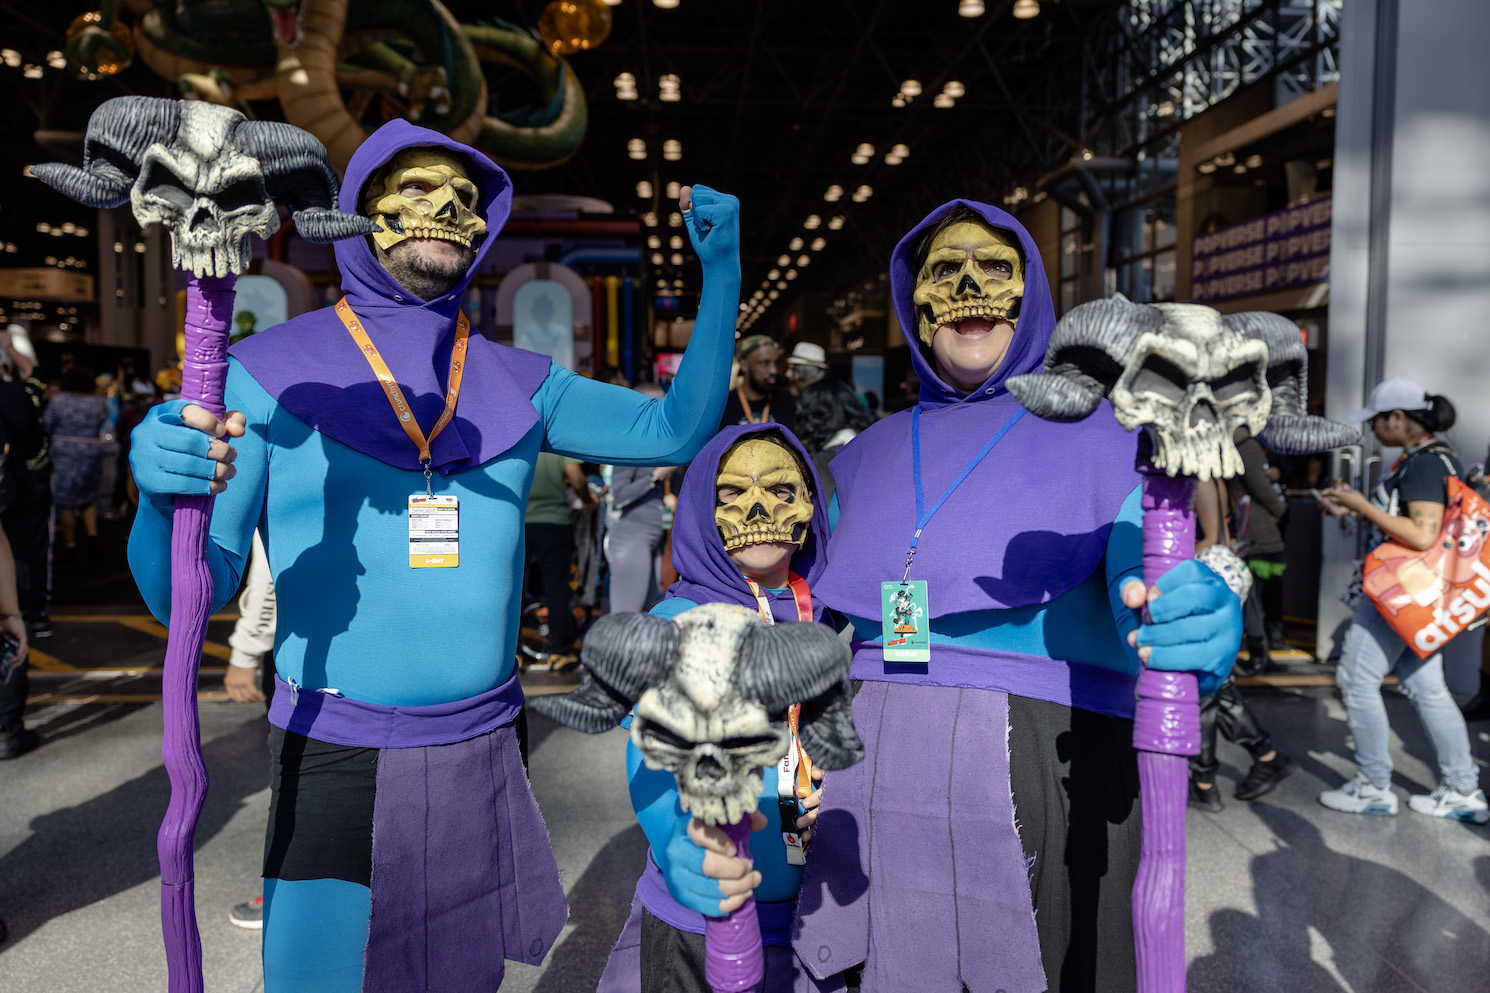 Two adults stand with a child in between them wearing Skeletor costumes. All three wear purple hoods, skeleton masks over the top halves of their faces and blue and purple body suits. They each hold a purple staff with a skeleton head on the top.